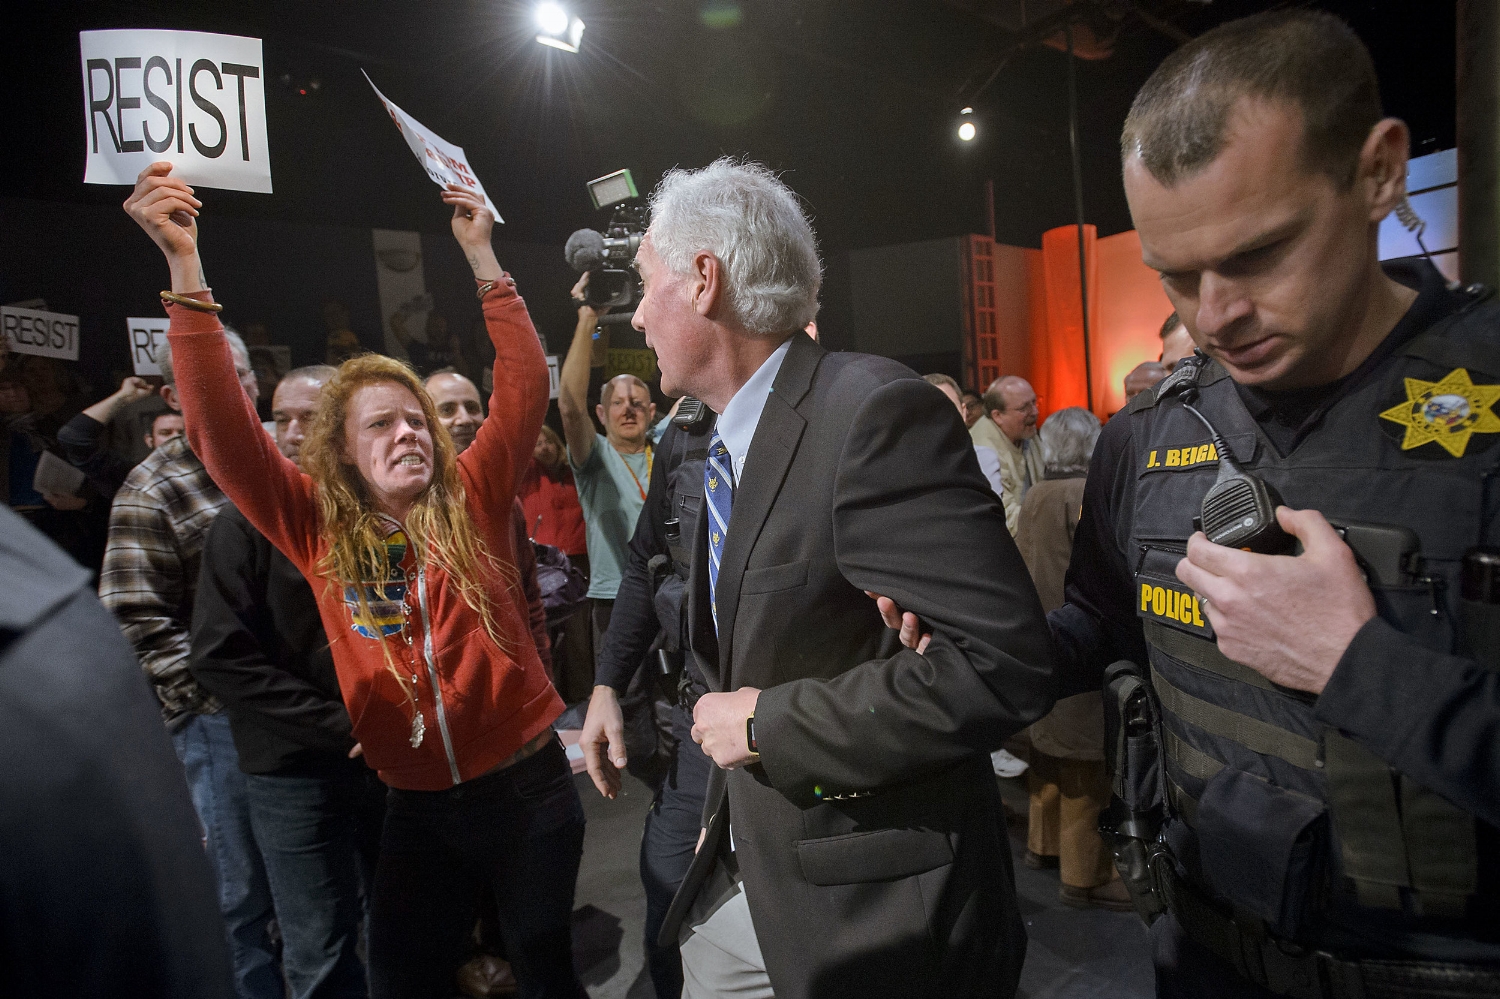  Congressman Tom McClintock (R) 4th District California, center, is escorted by Roseville Police through a hostile audience from the Tower Theater in Roseville on Saturday, February 4, 2017.&nbsp; McClintock held a town hall meeting at the theater an